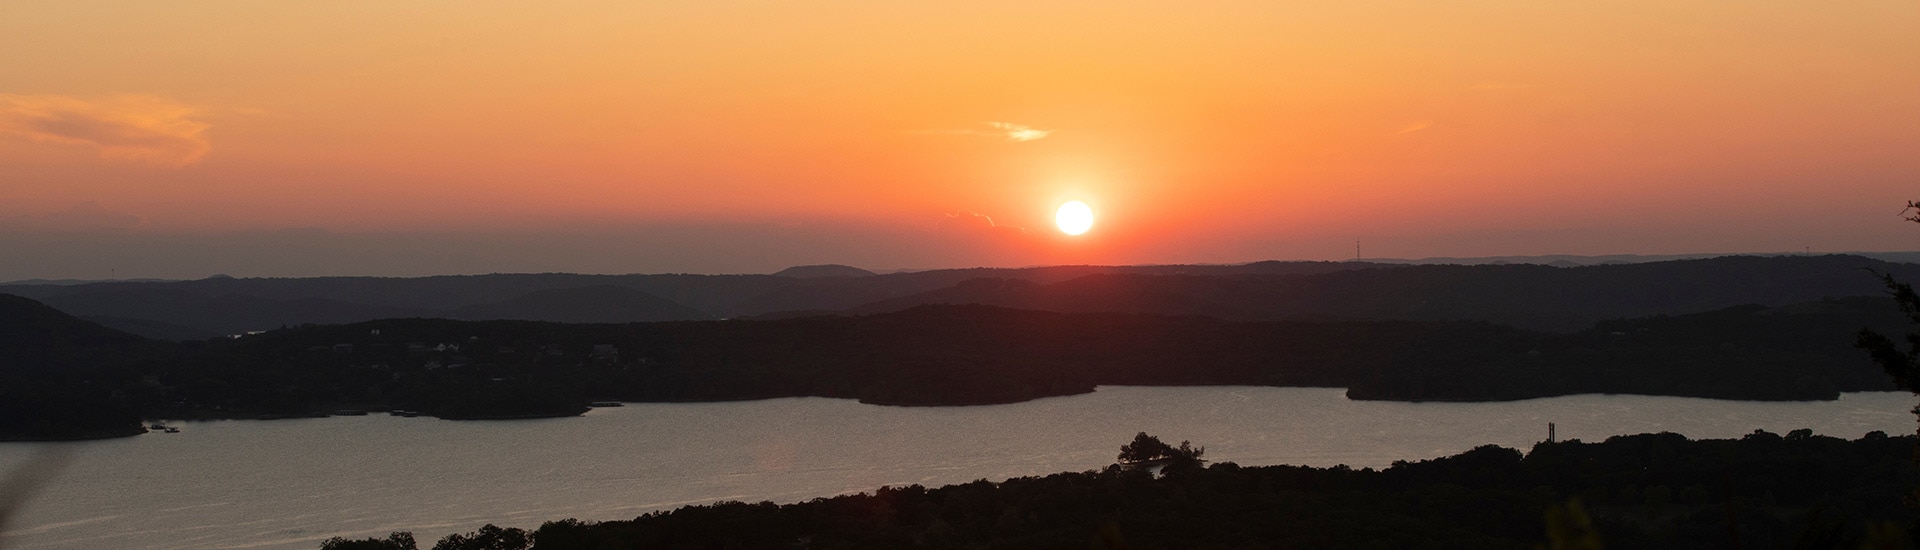 Panorama of a fiery orange sunset behind the Branson hills with Table Rock Lake in the foreground.